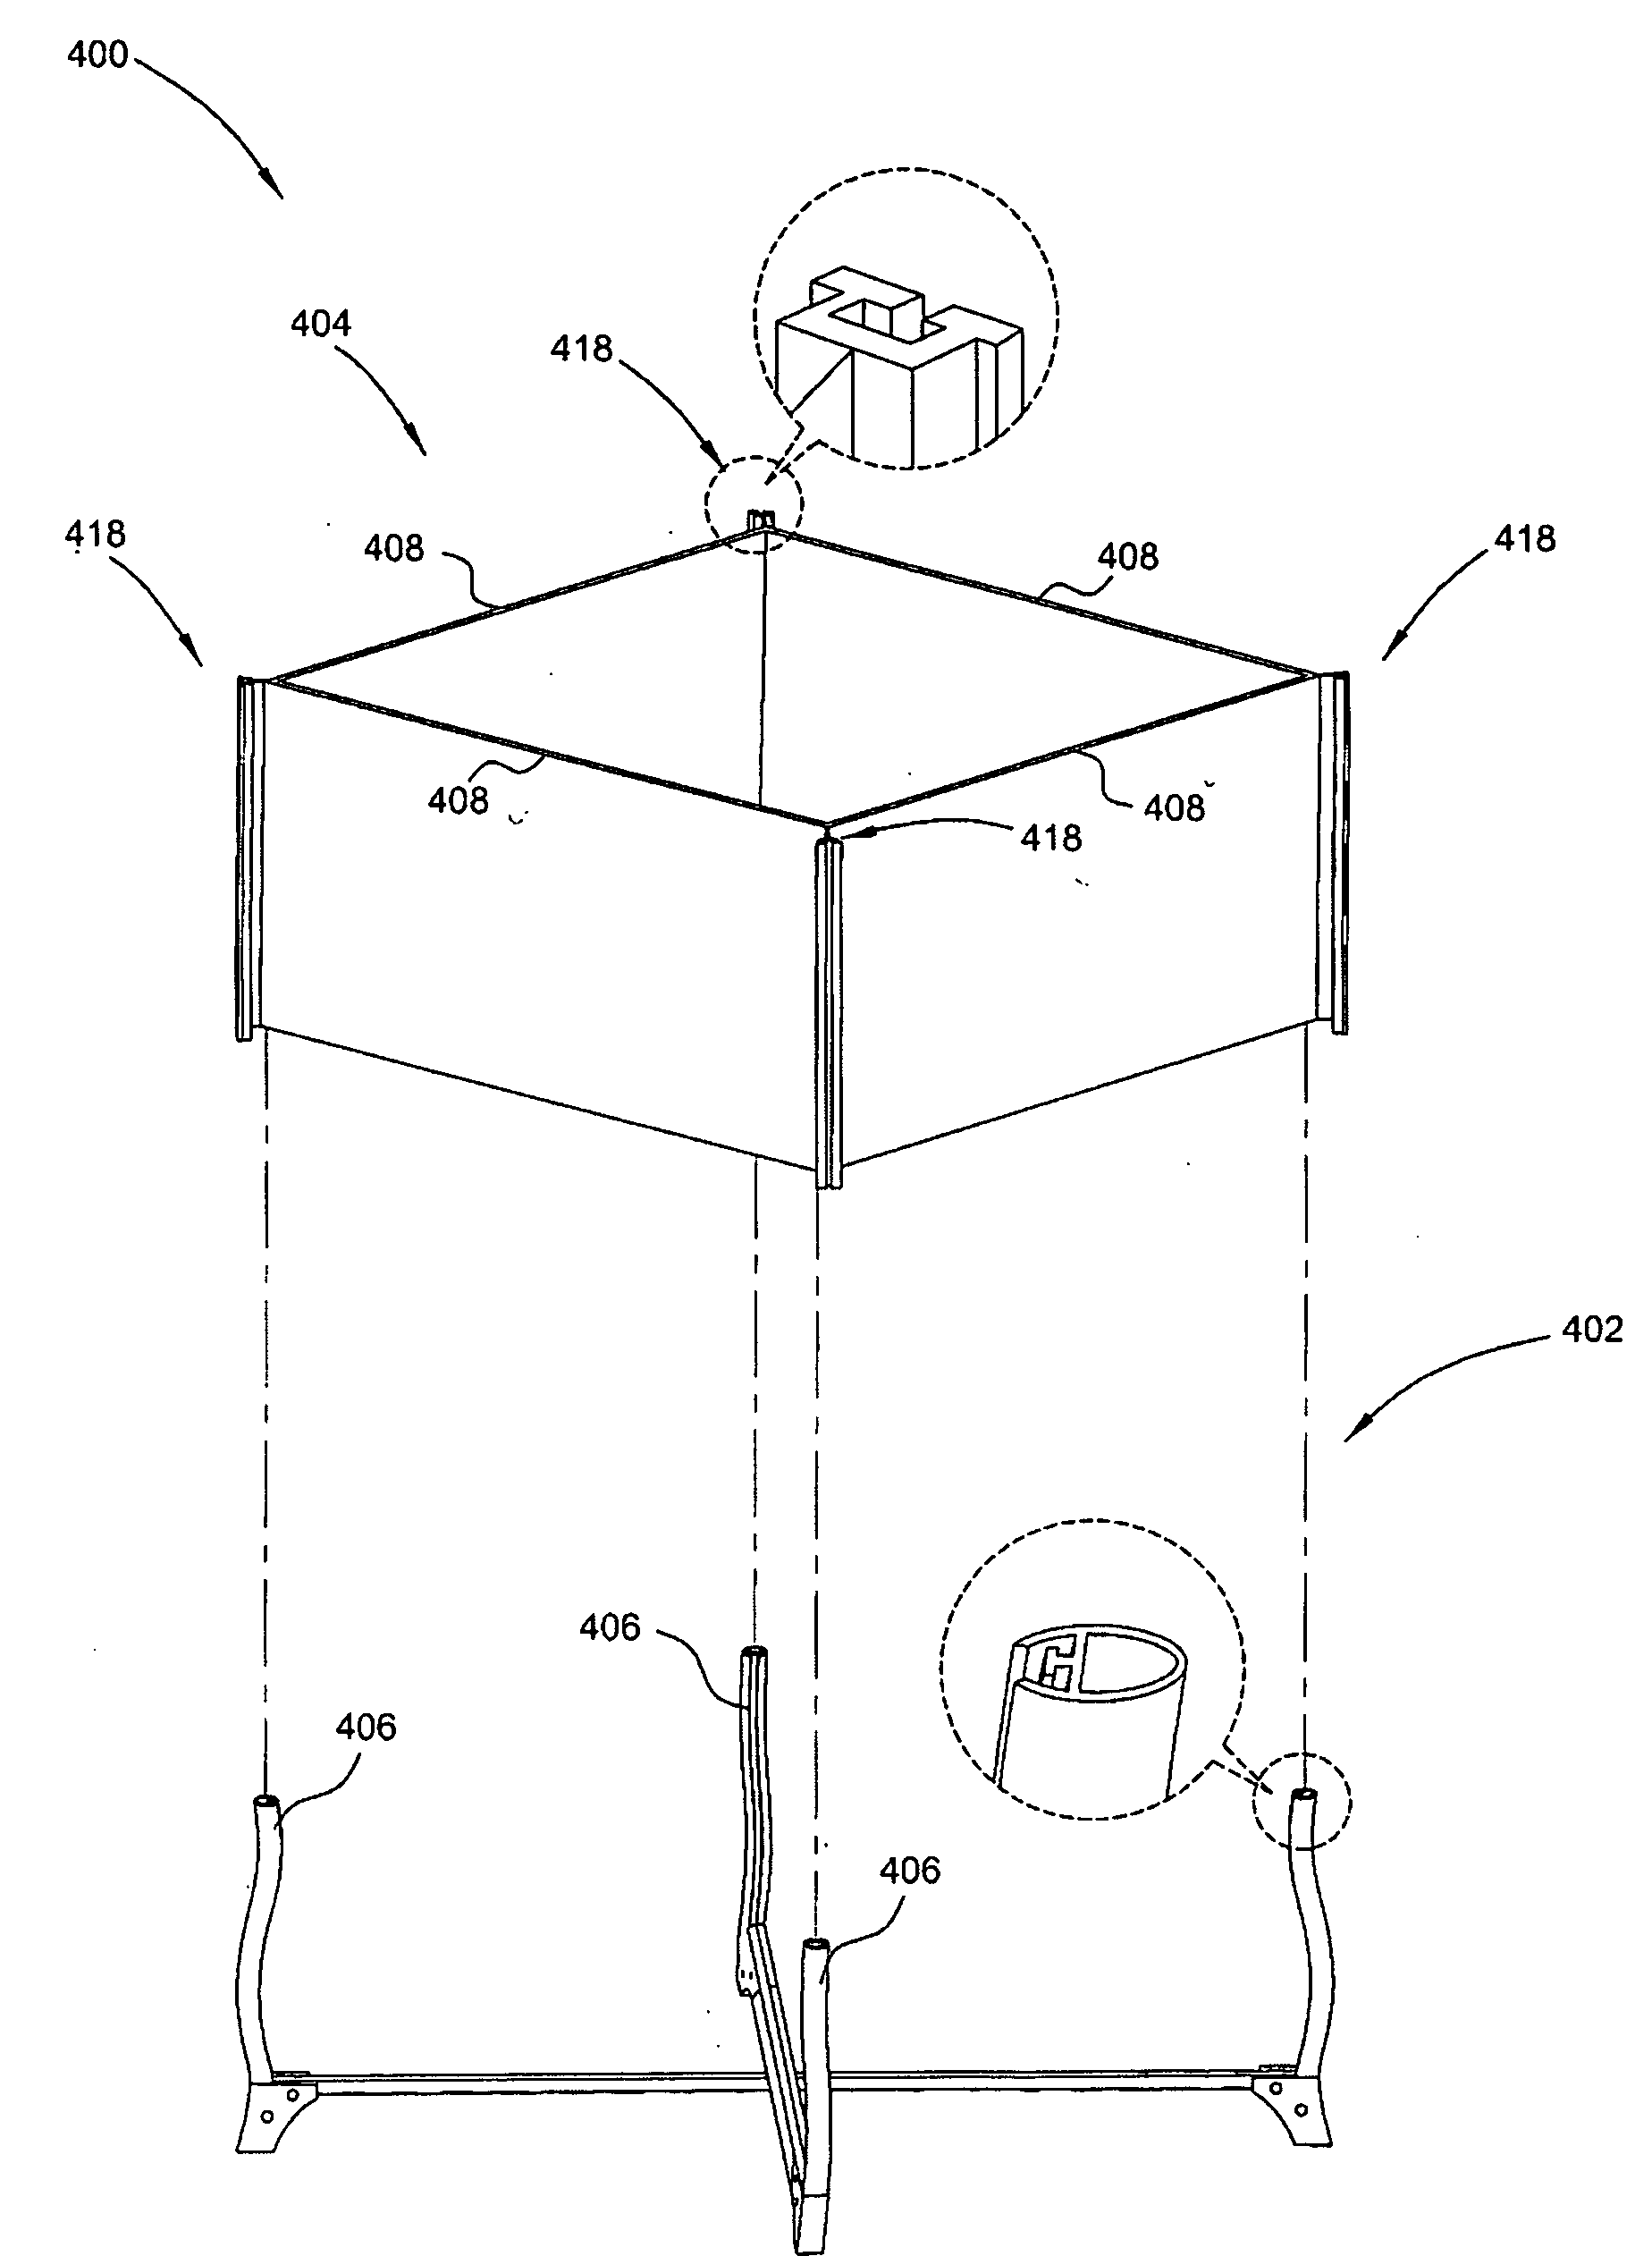 System and method of assembling a nursery device for supporting a baby occupant